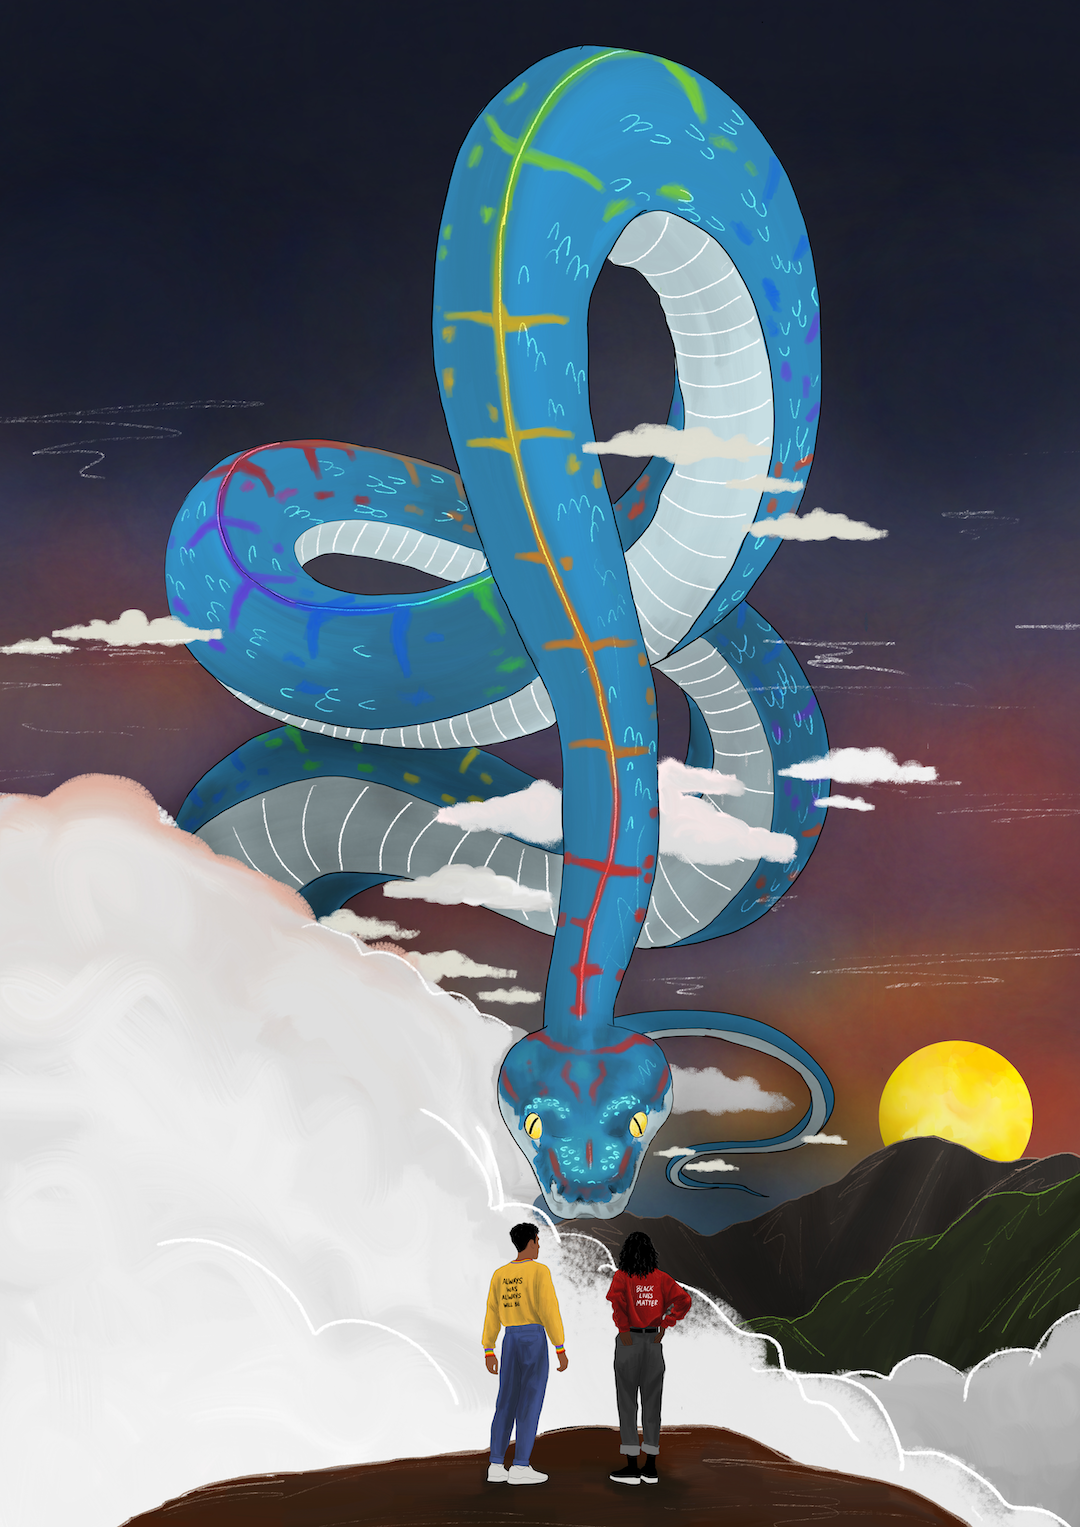 An Ancestral spirit snake appears to two people on an astral plane, floating in the sky against a setting sun.